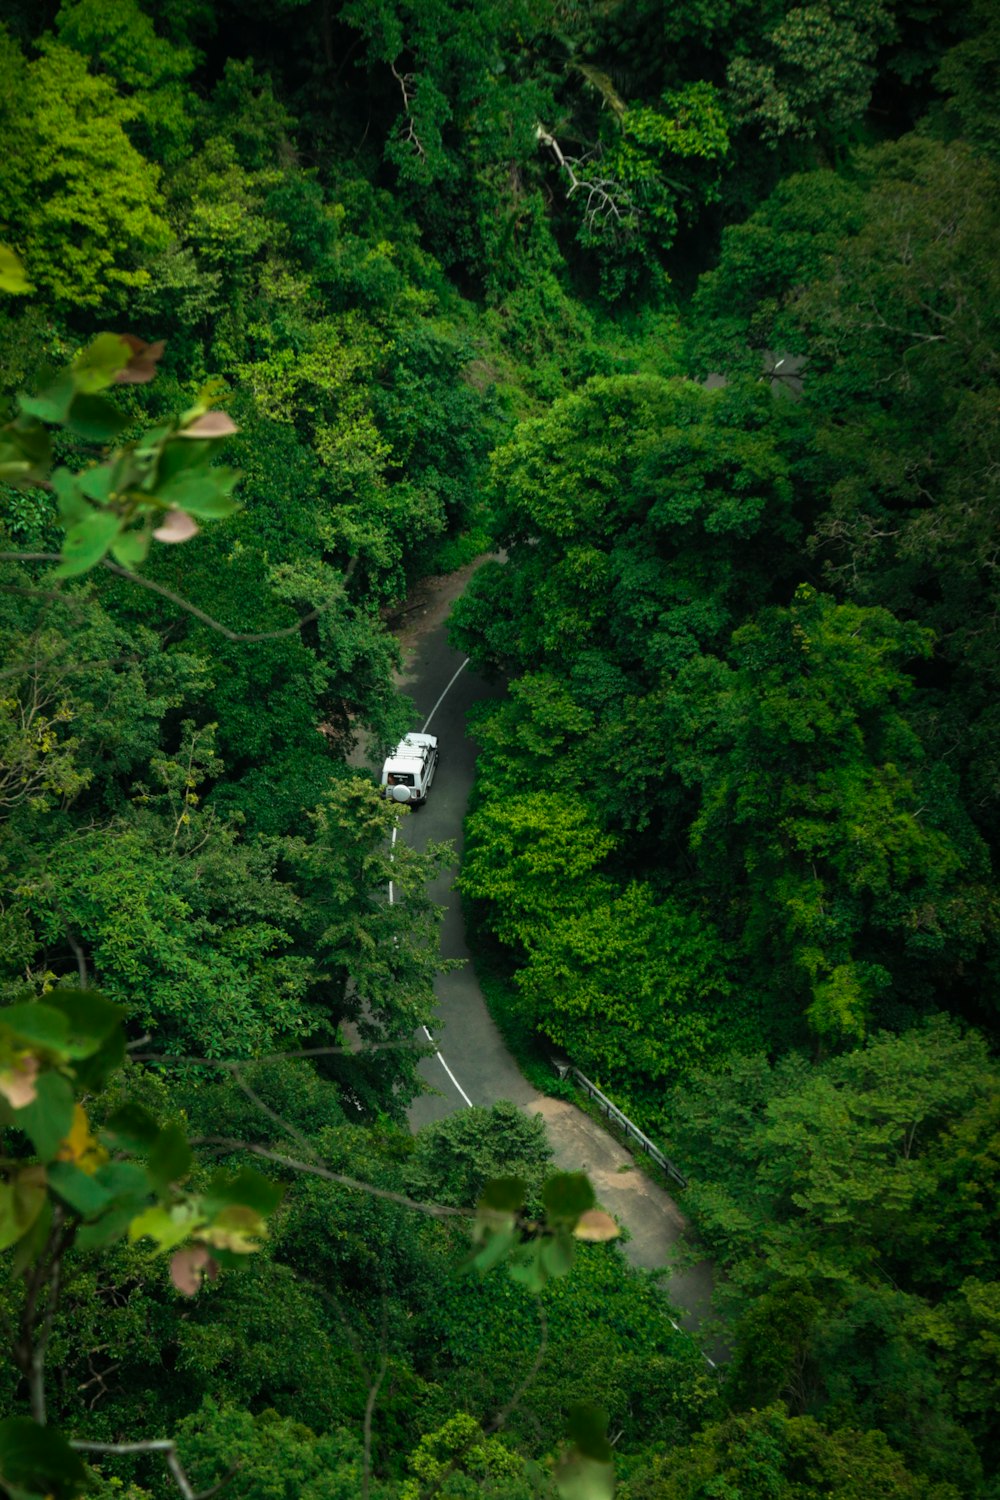 cars on road in between trees during daytime